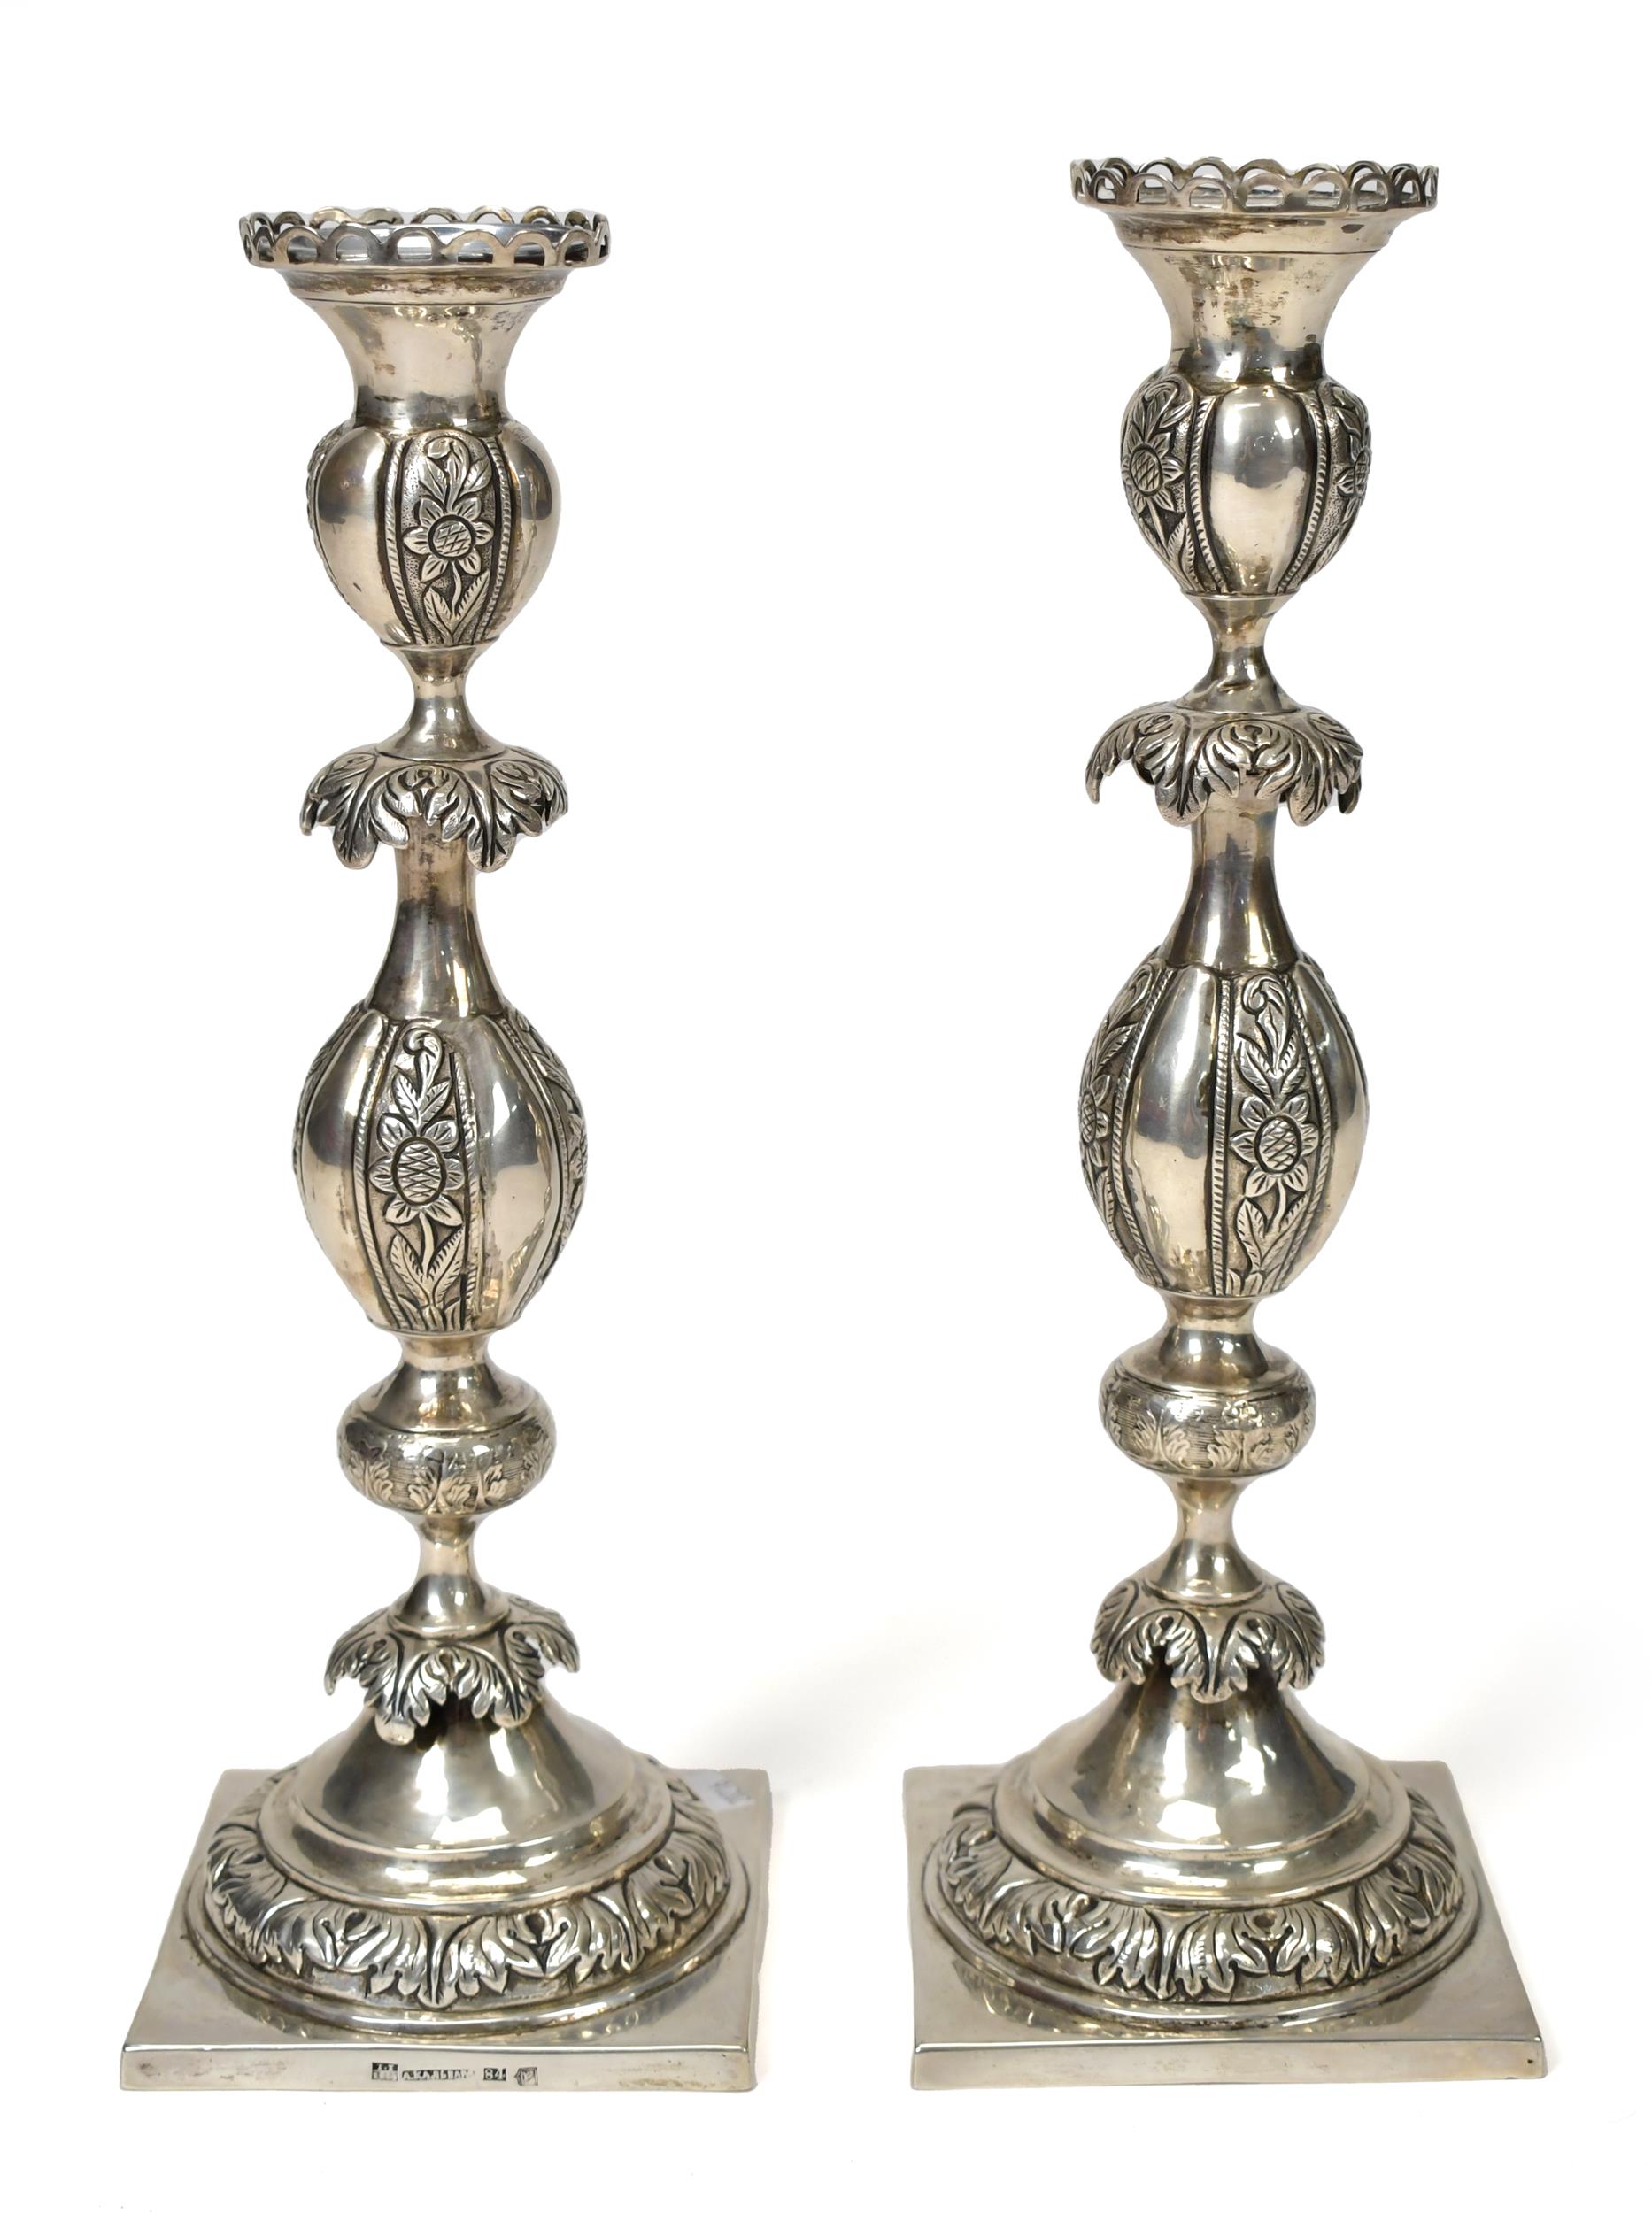 PAIR OF RUSSIAN SILVER CANDLESTICKS  3ab0fd